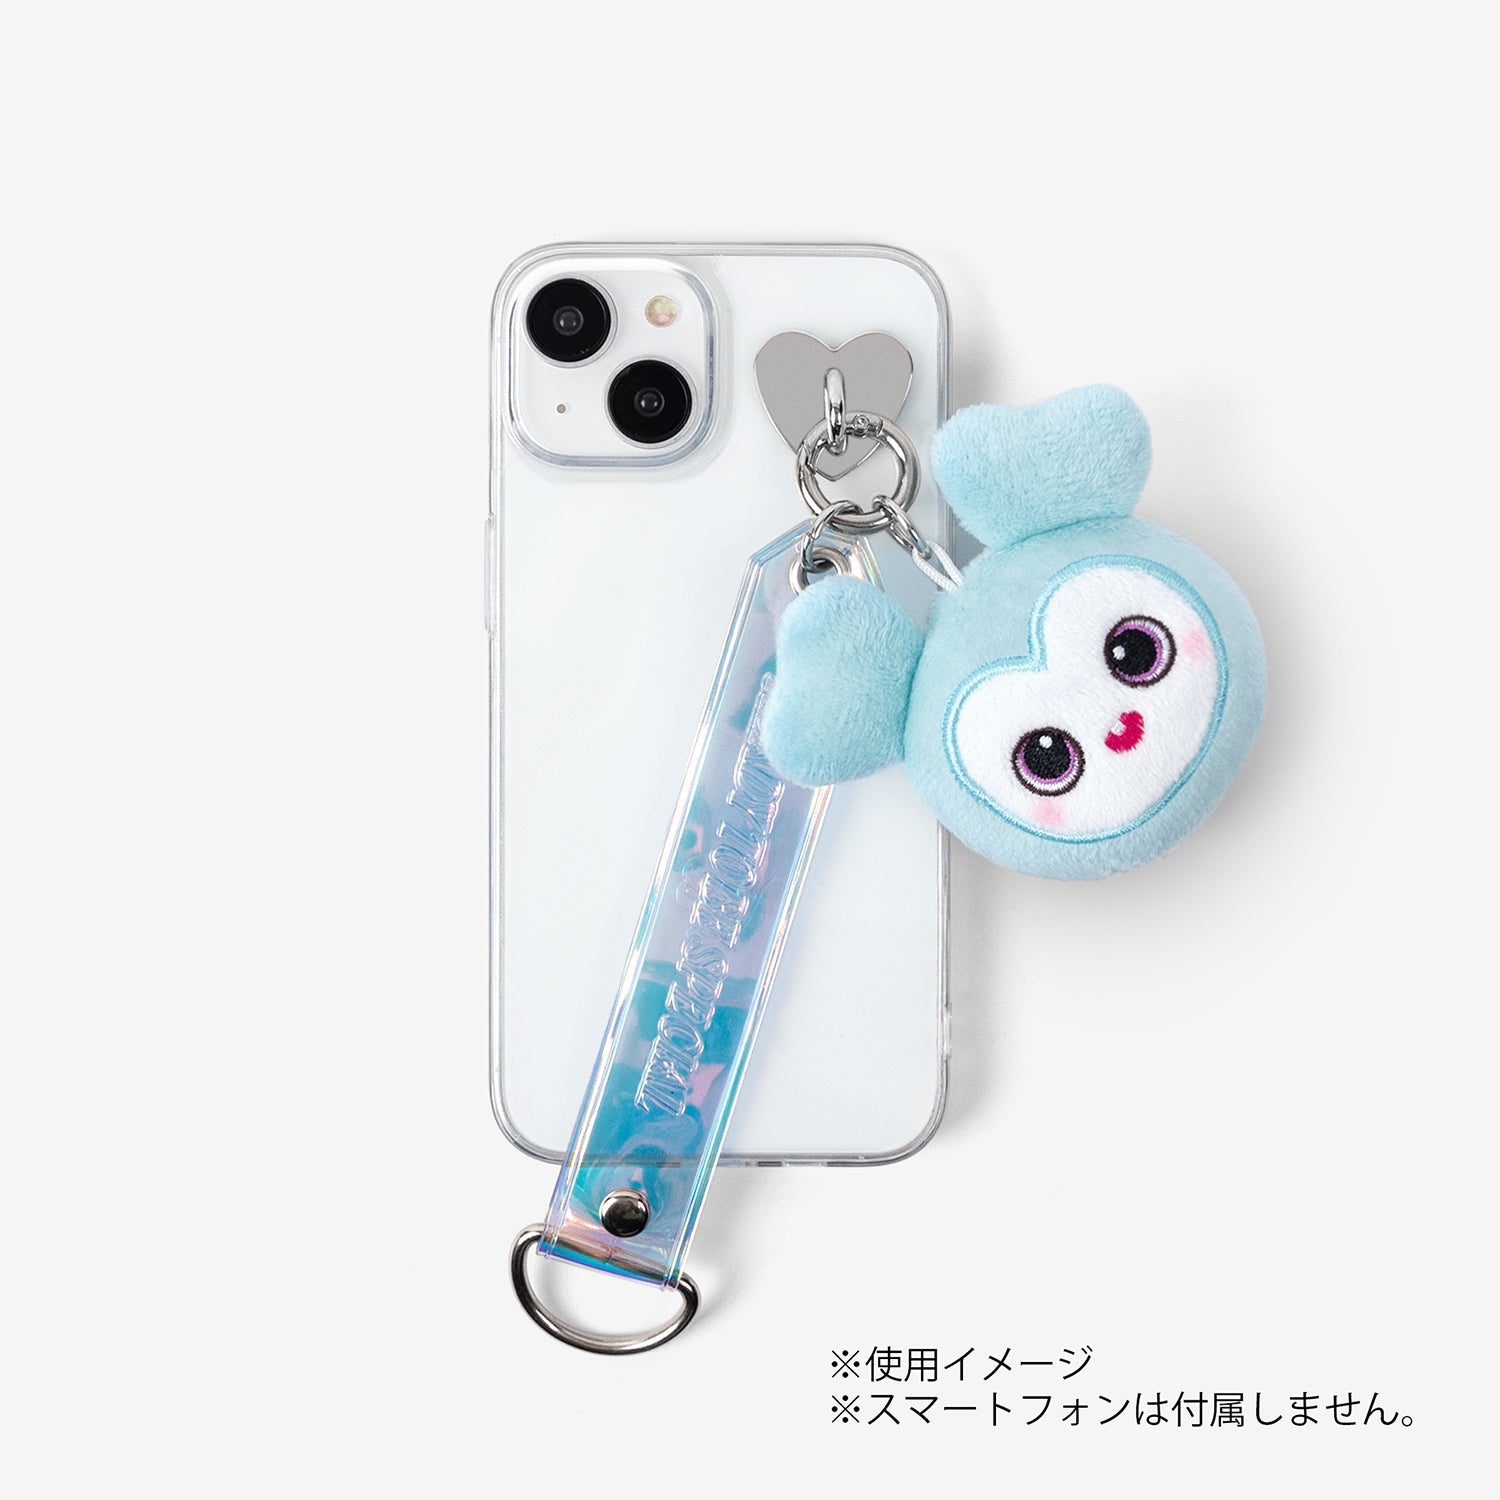 BABY LOVELYS SMARTPHONE CHARM STRAP - BABY NAVELY / TWICE『READY TO BE SPECIAL』